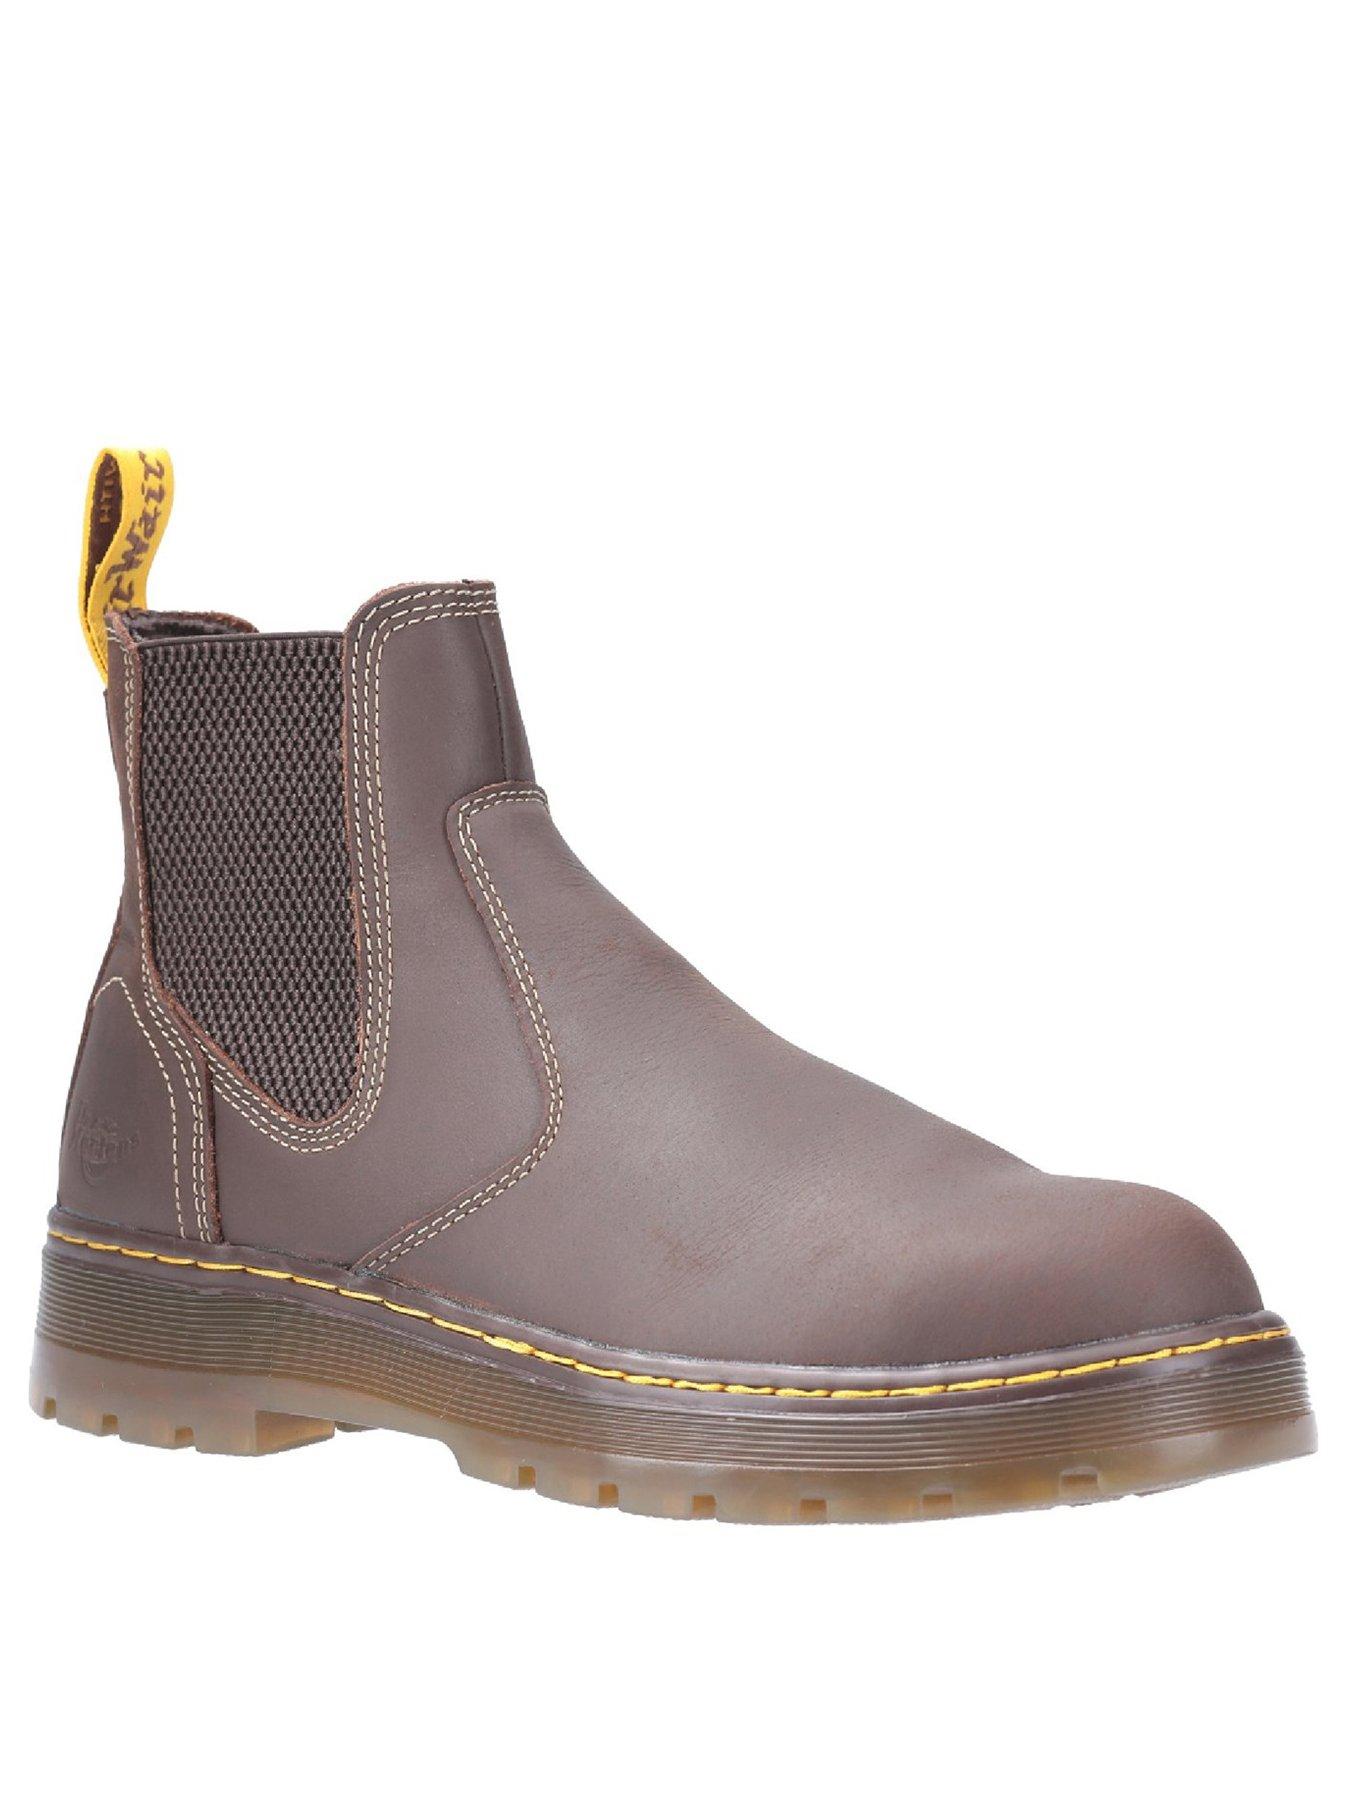 safety chelsea boots